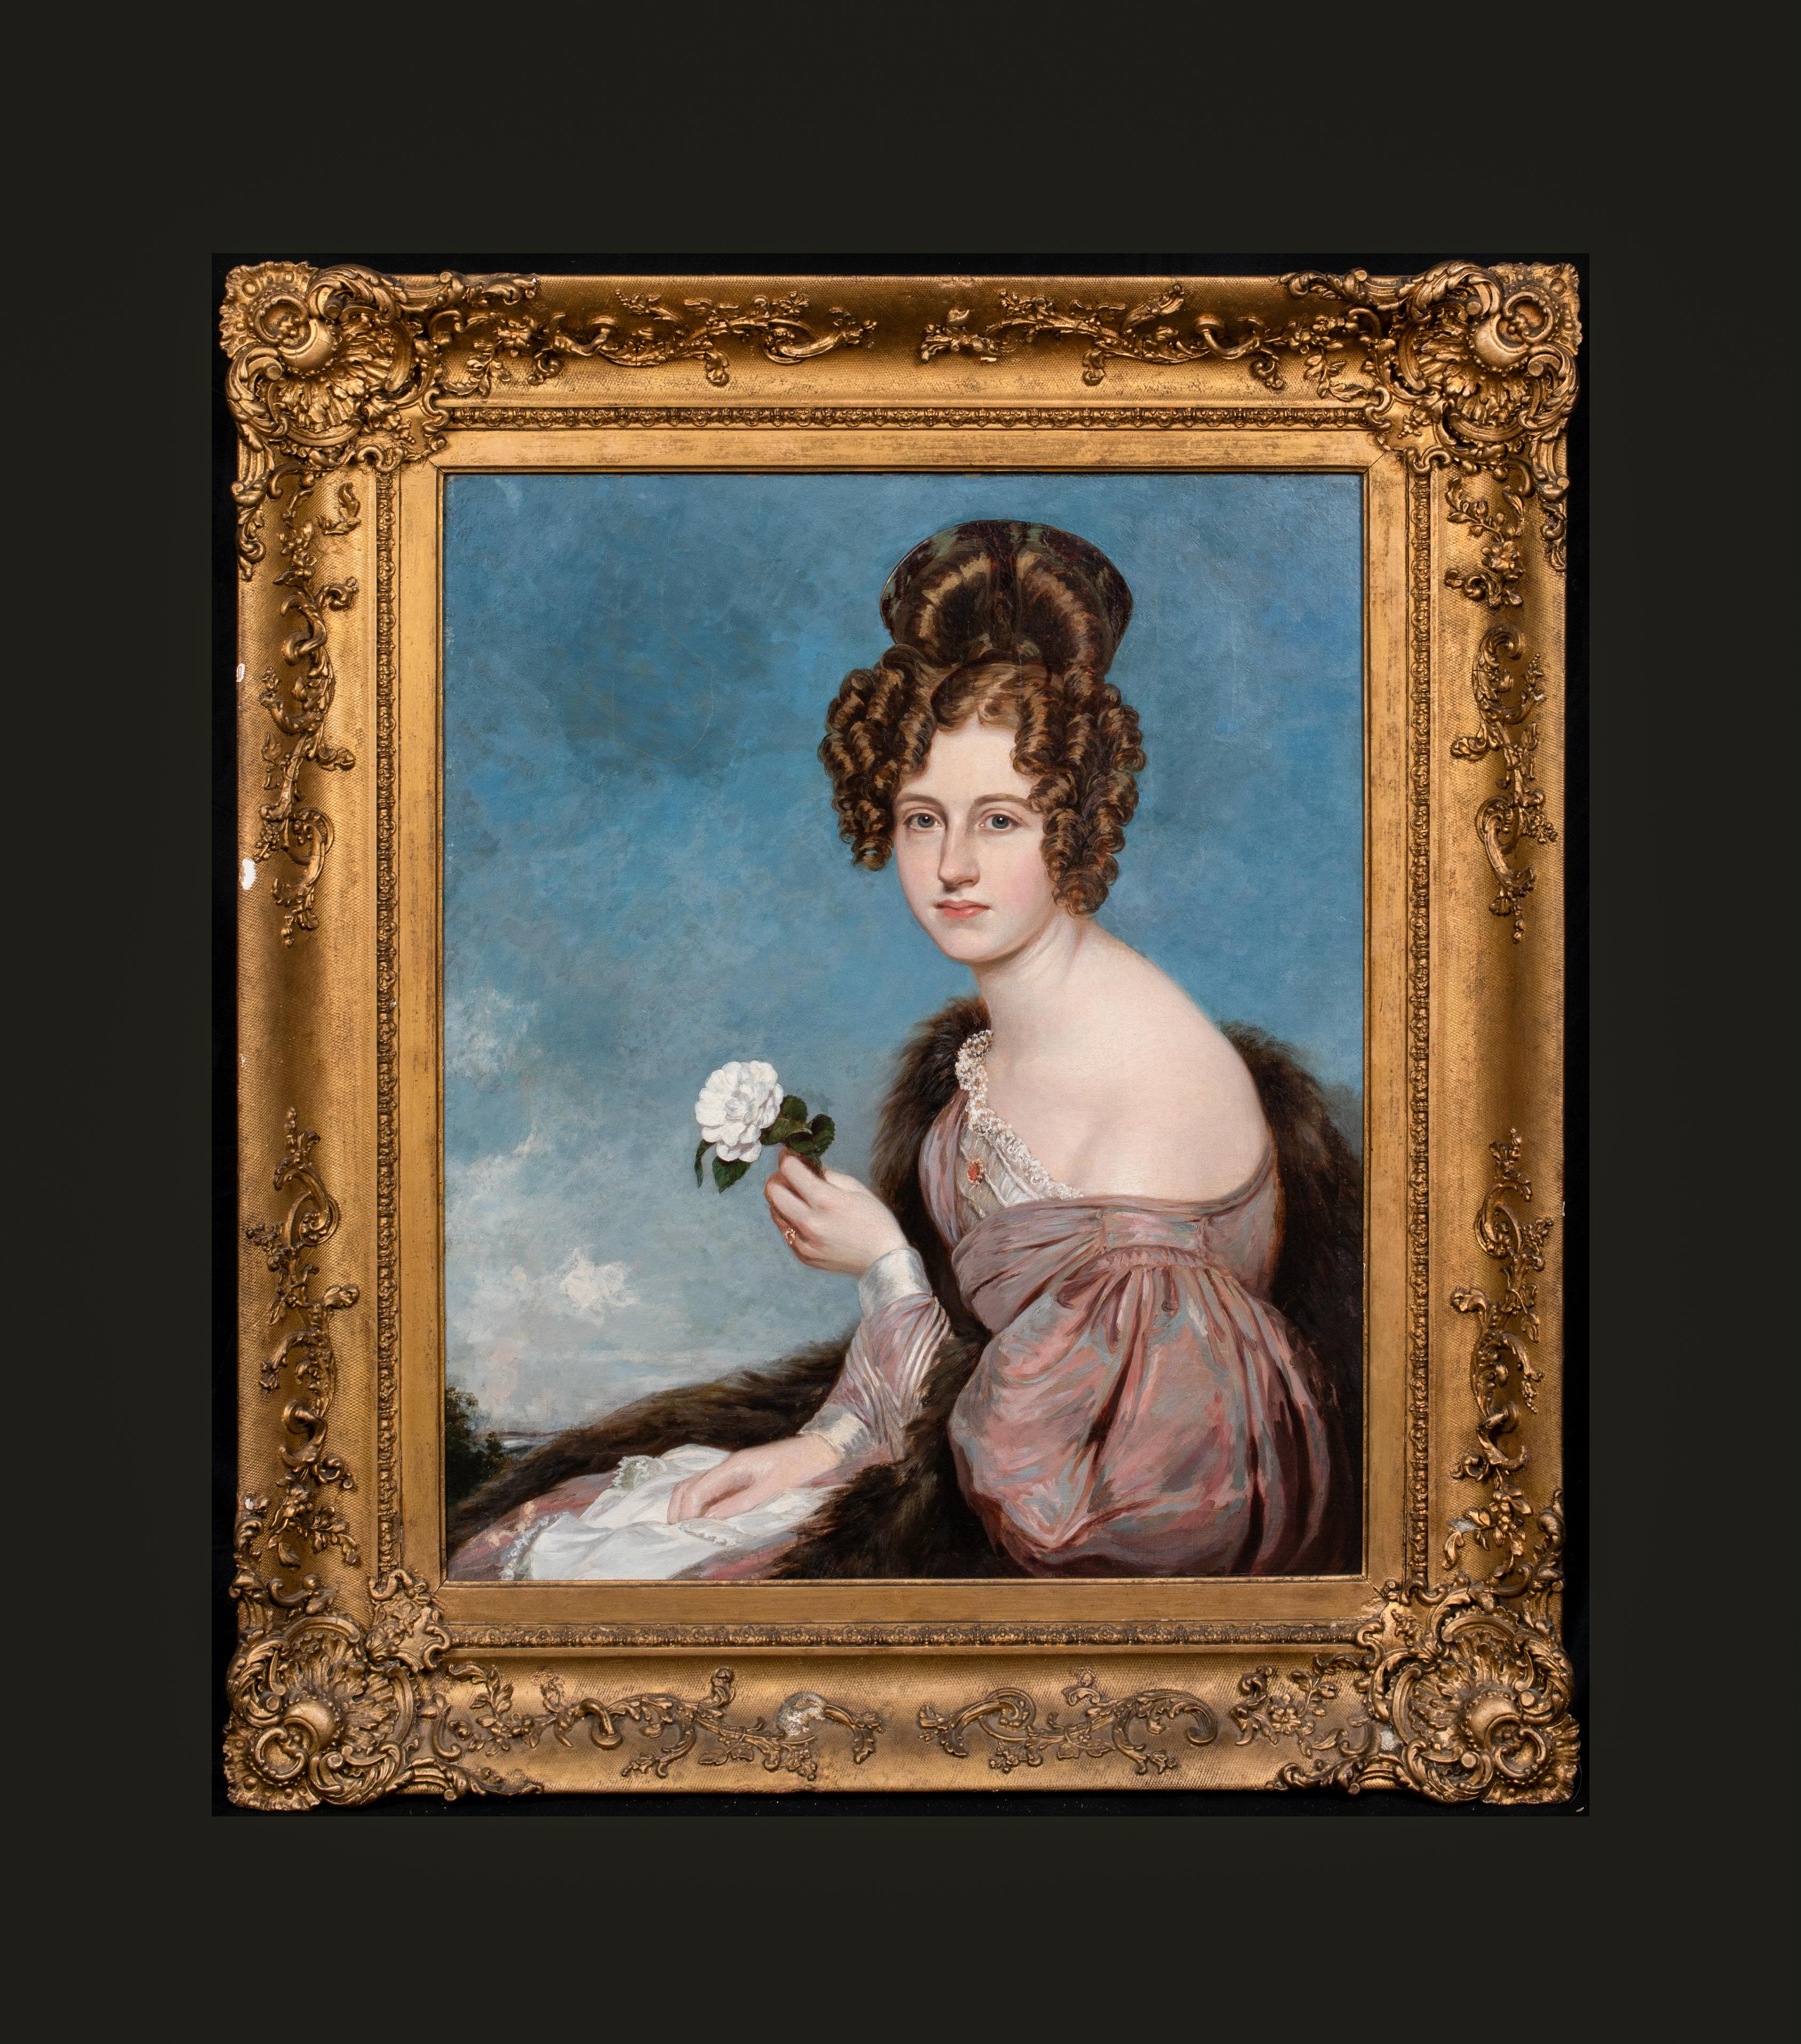  Portrait Of A Lady Holding A Camellia, early 19th Century    - Painting by Unknown